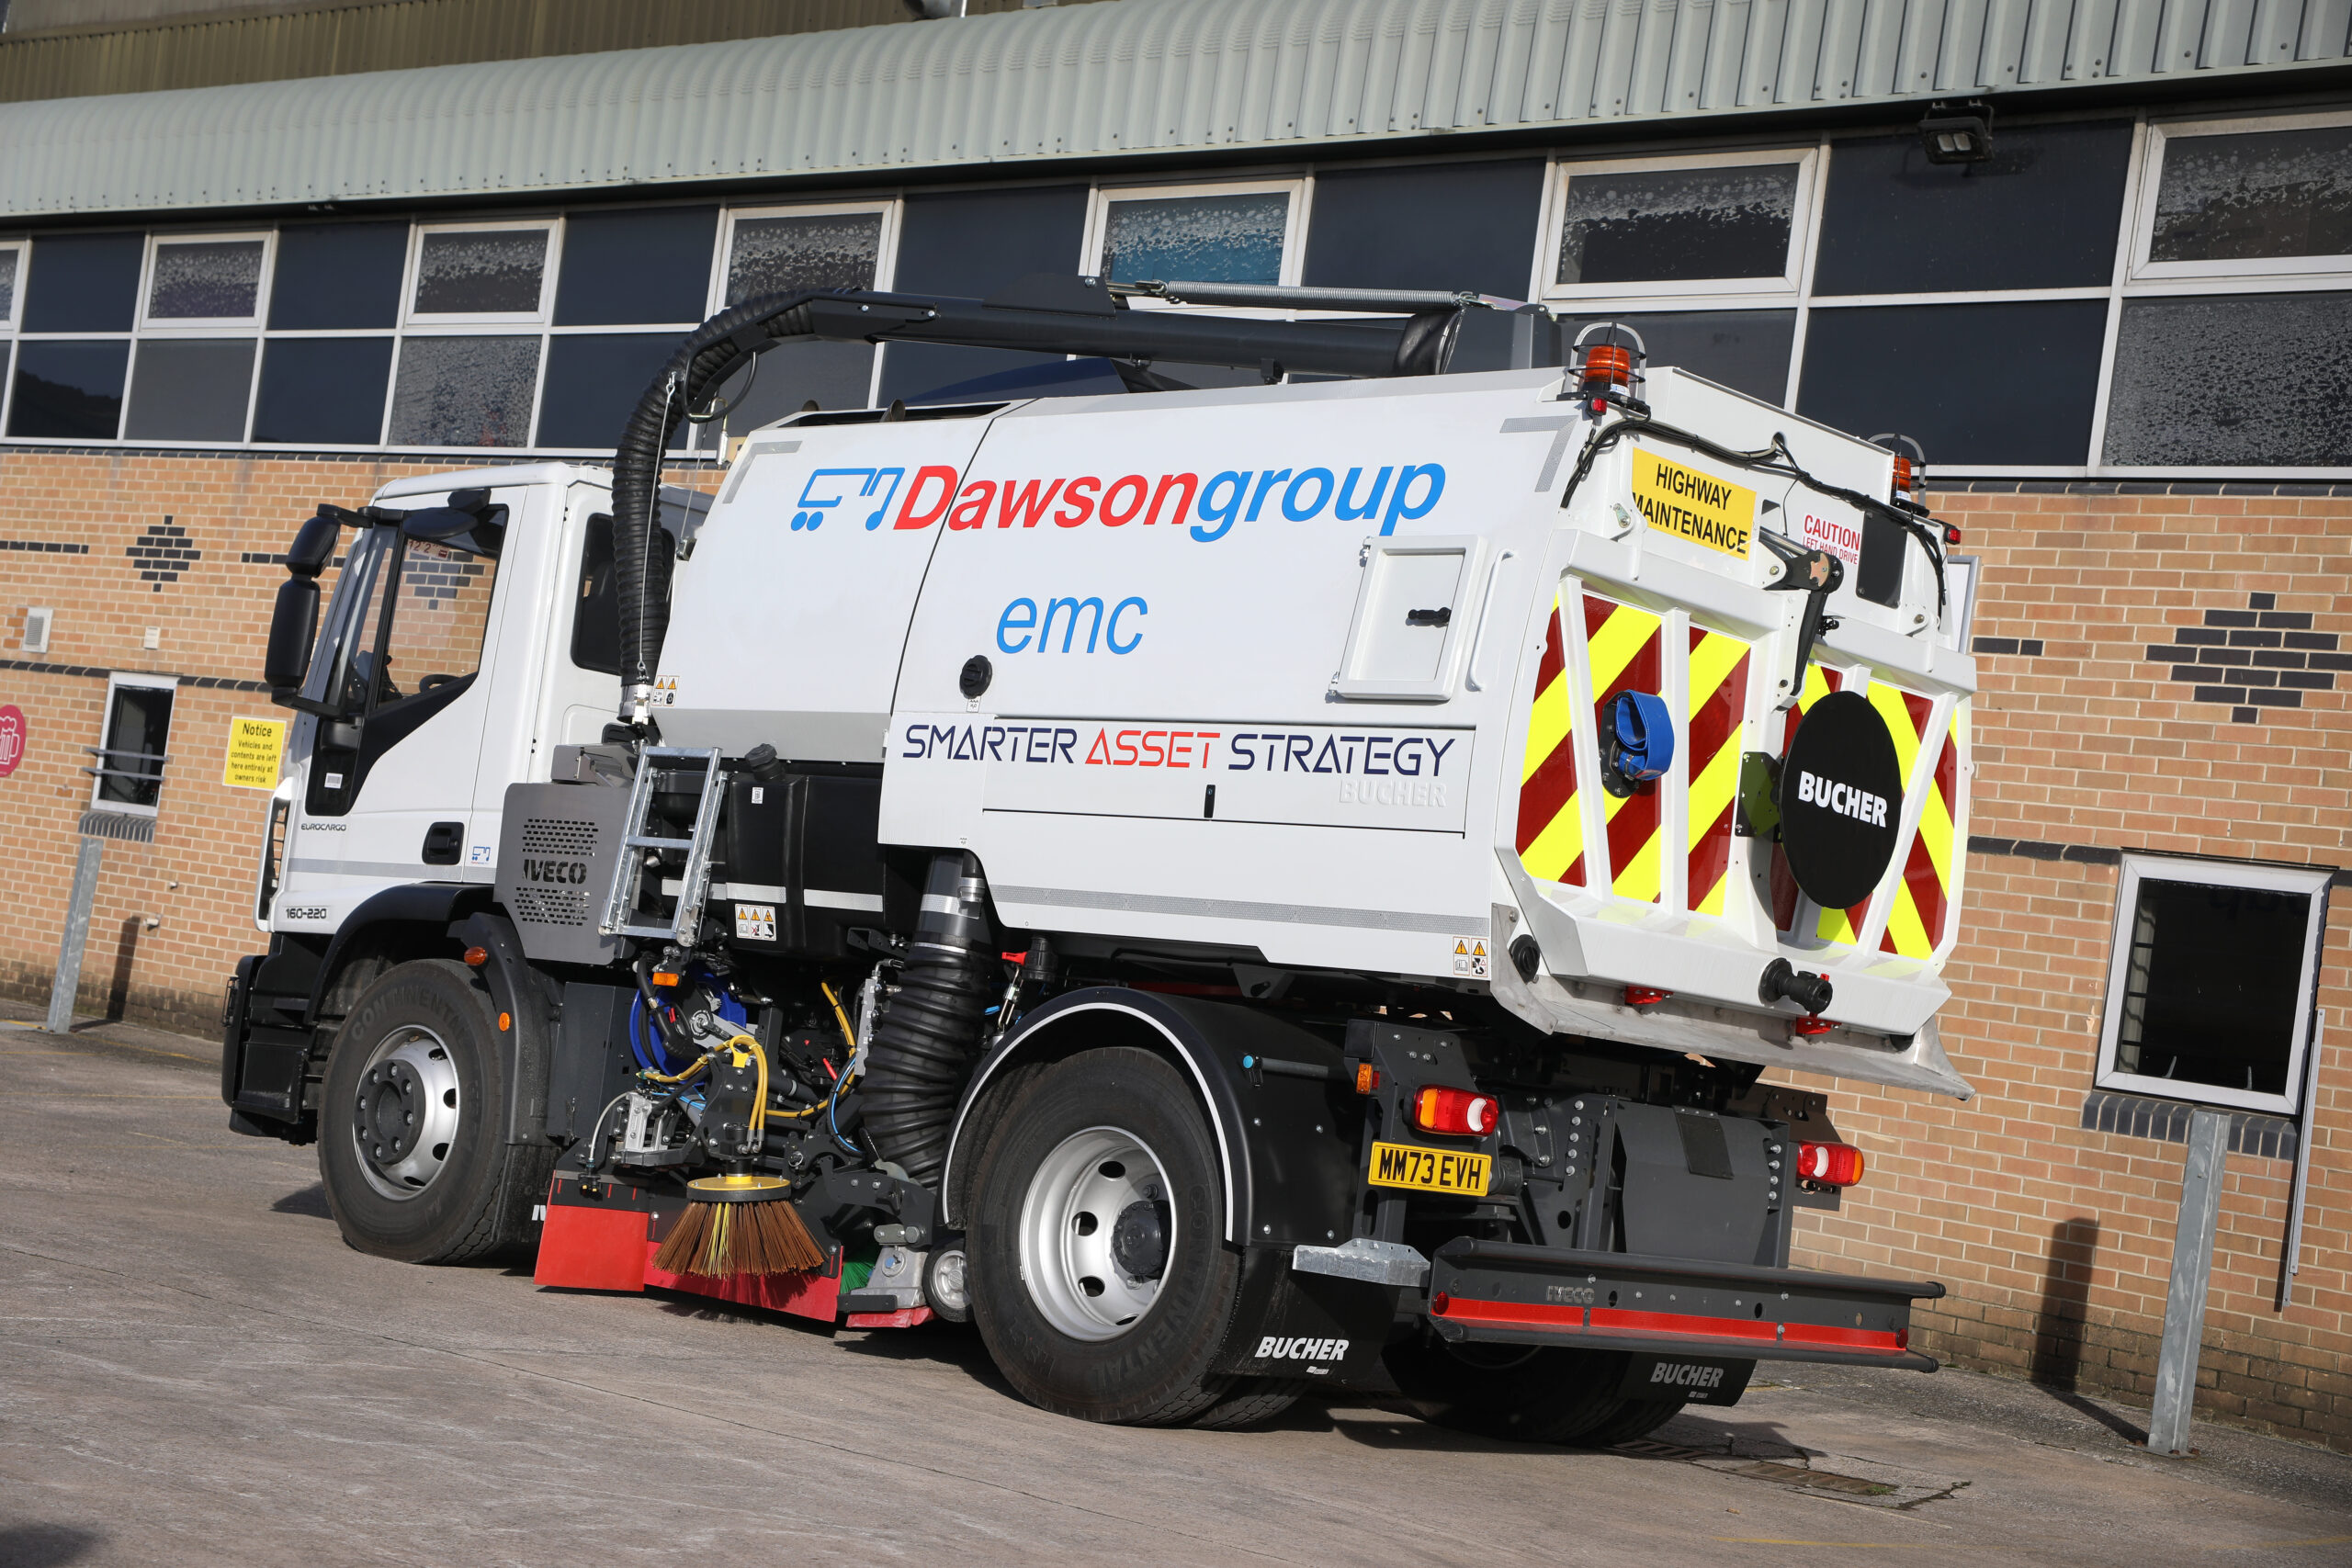 IVECO Eurocargo Sweeps into Europe’s Largest Fleet with Dawsongroup